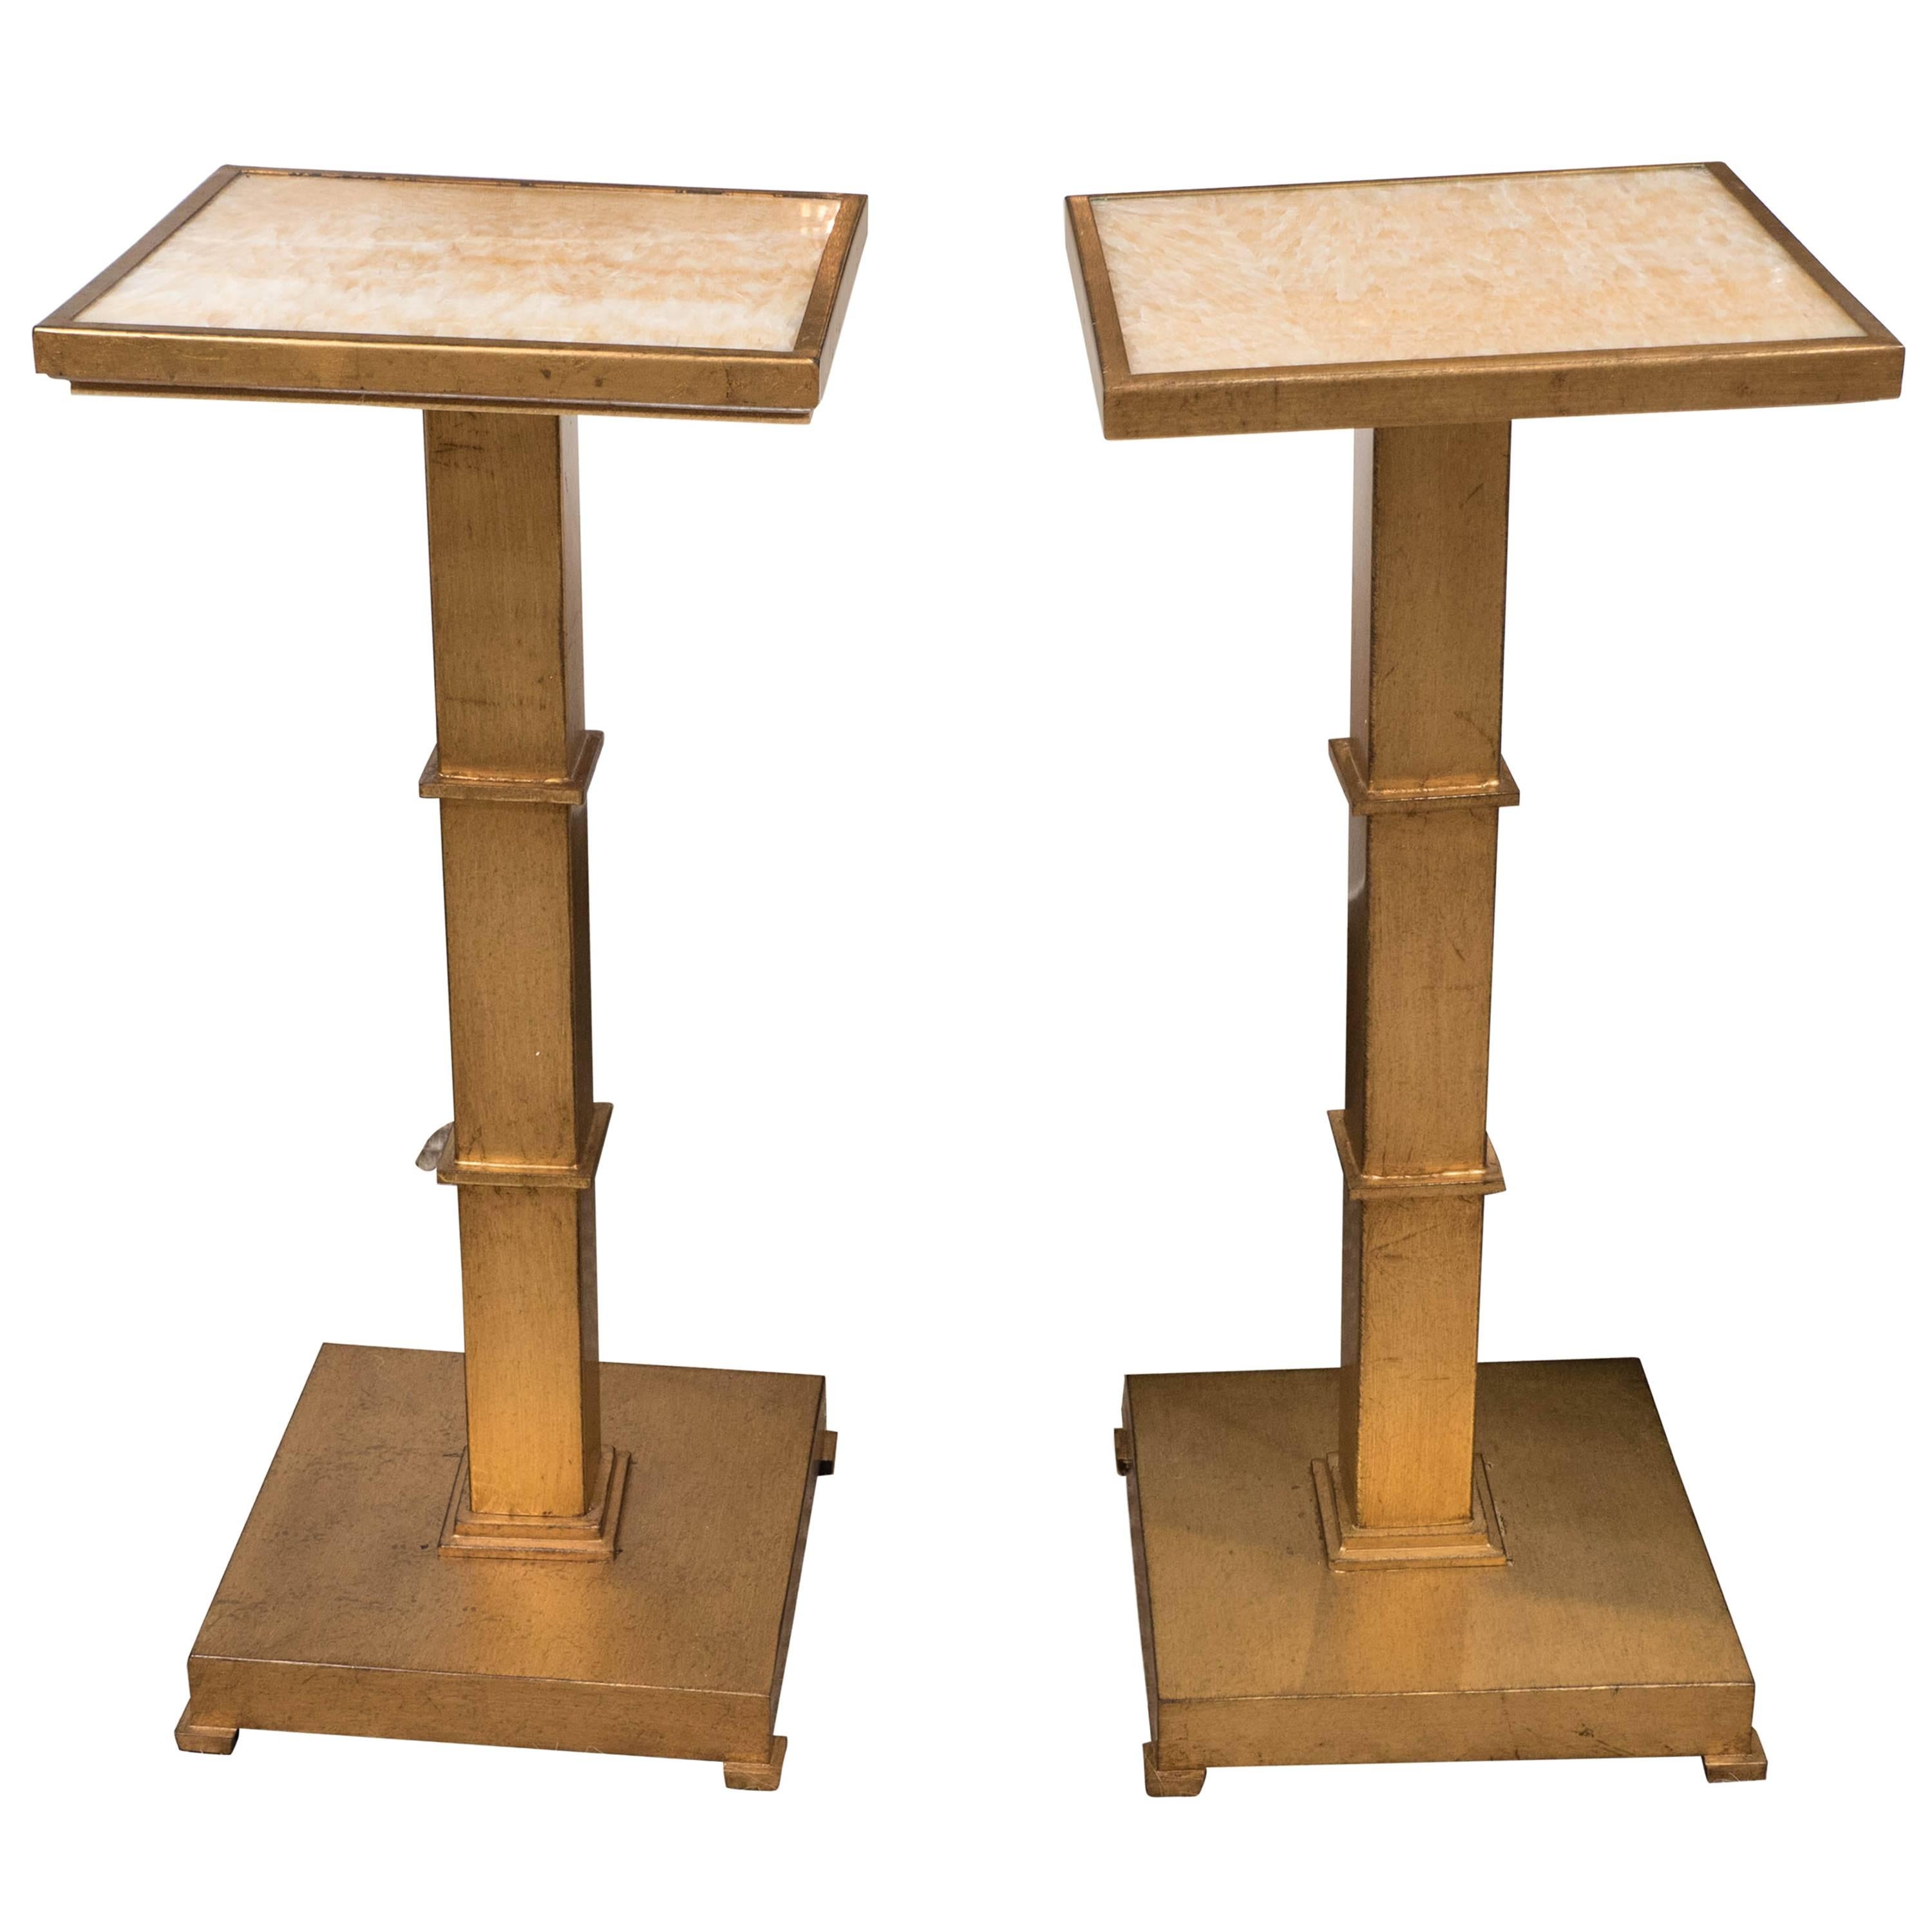 Pair of Chic Small Side Tables